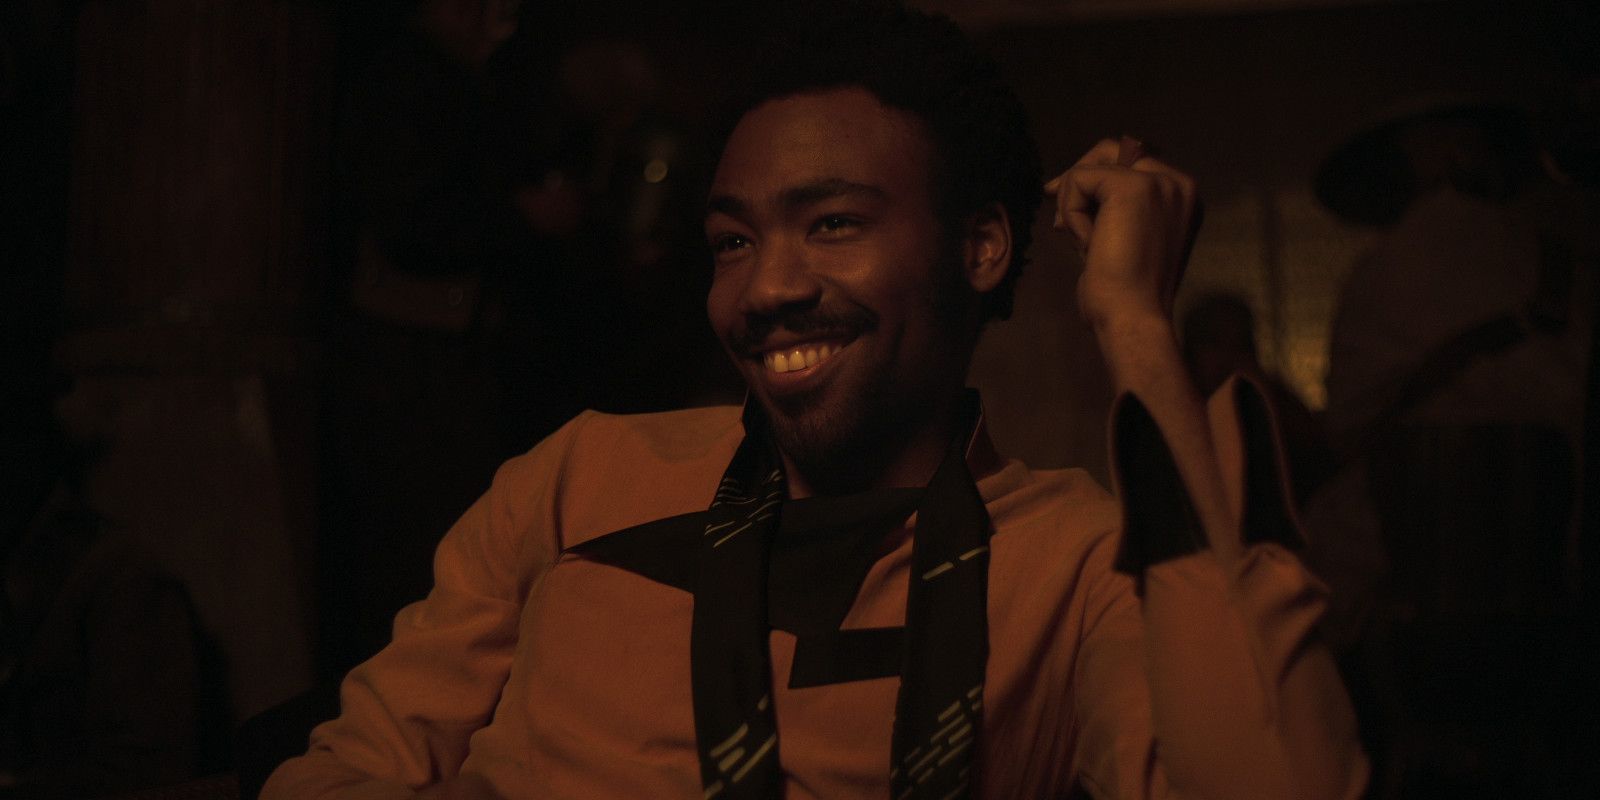 Why Donald Glover Keeps His Private Life Private